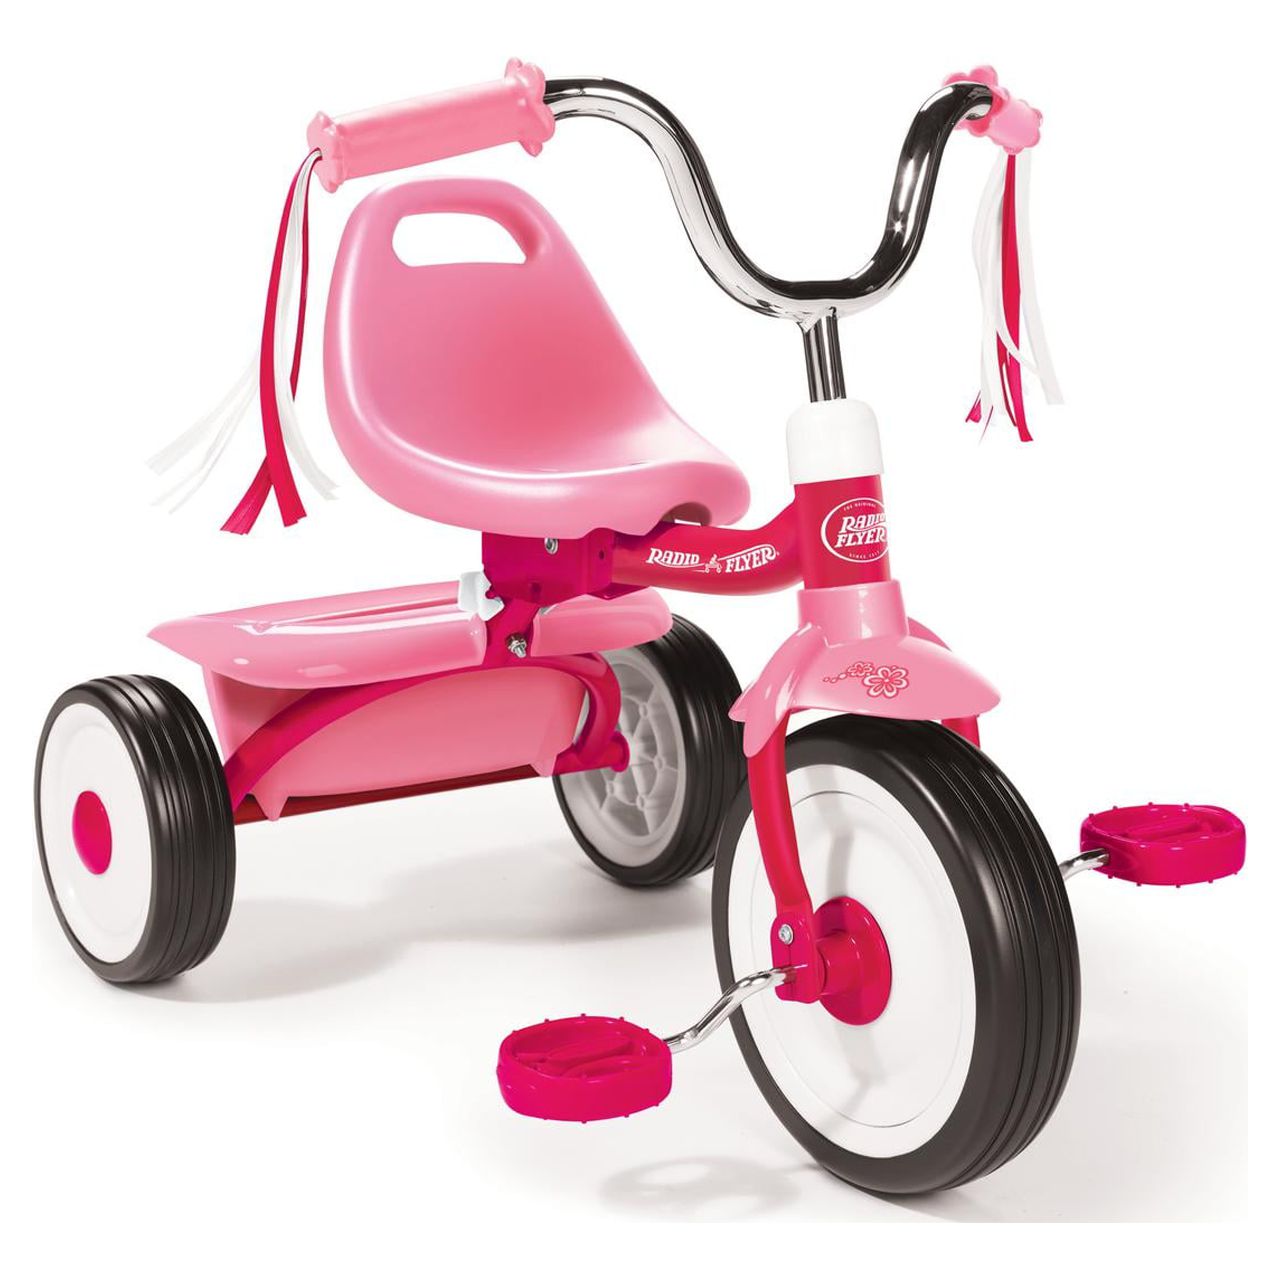 Radio Flyer, Ready to Ride Folding Trike, Fully Assembled, Pink, Beginner Tricycle for Kids, Girls - image 3 of 10